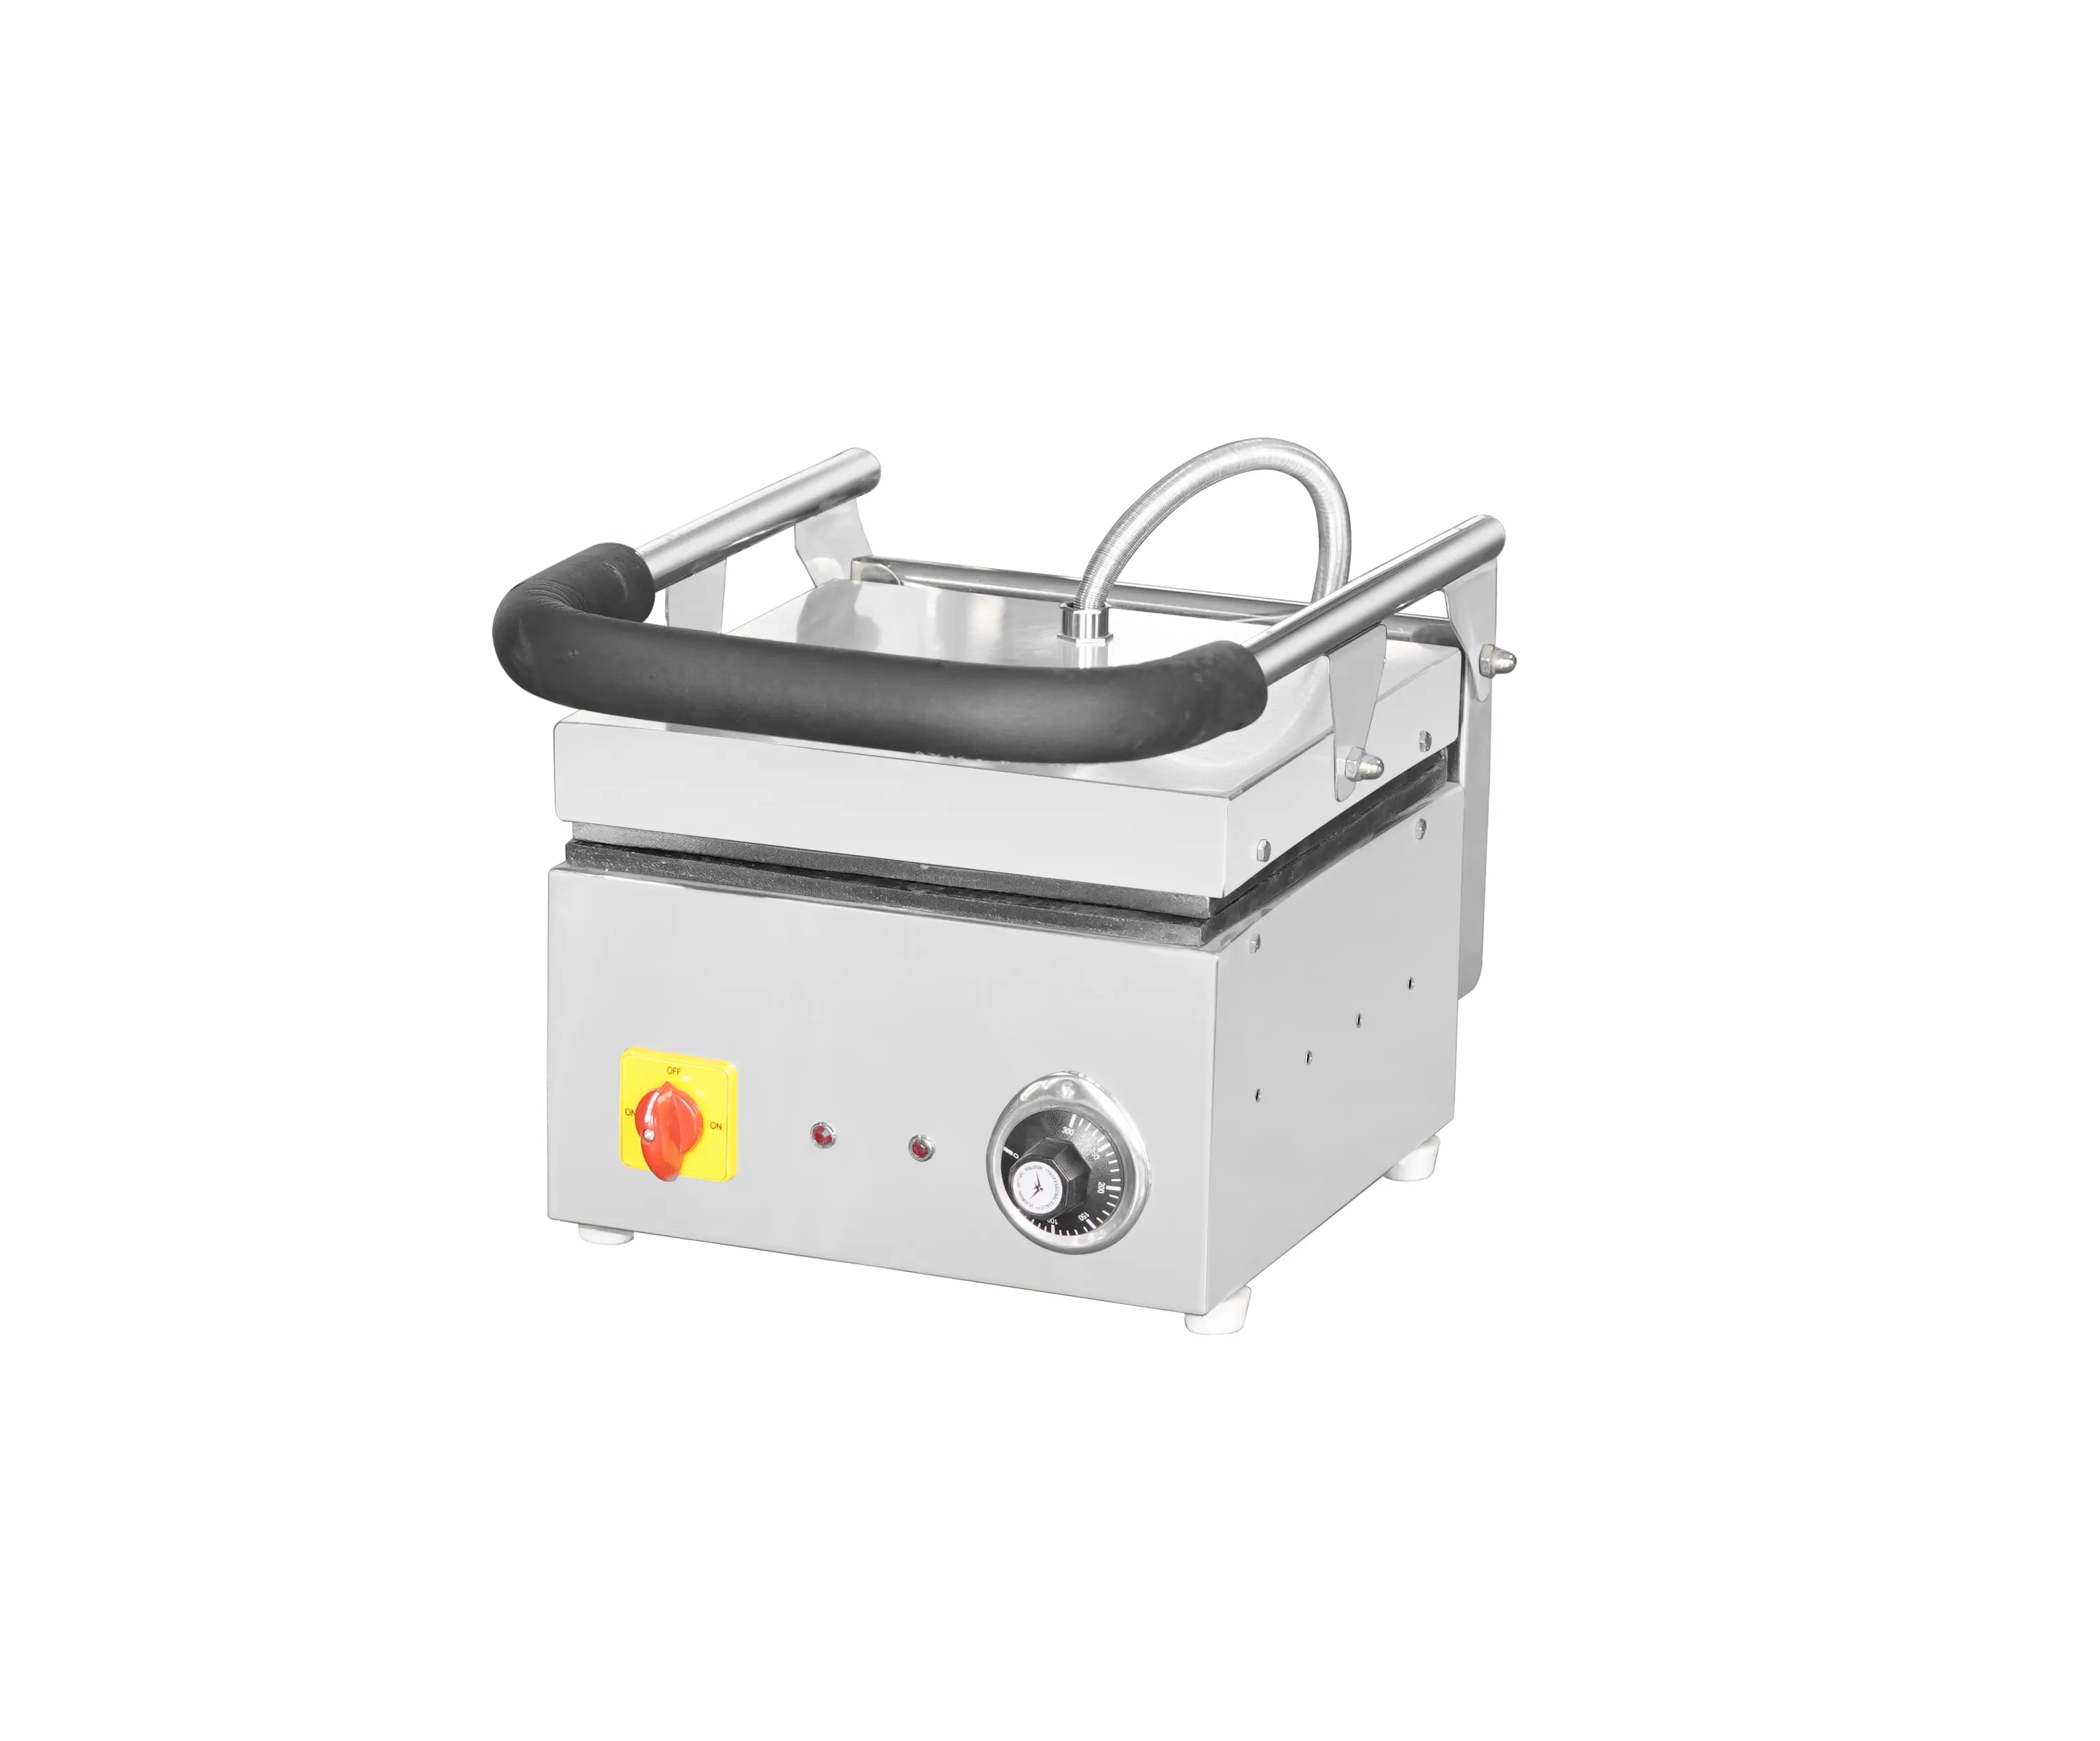 Fully Steel Body Automatic Sandwich Griller For Commercial and Home Uses for Export from Indian Supplier